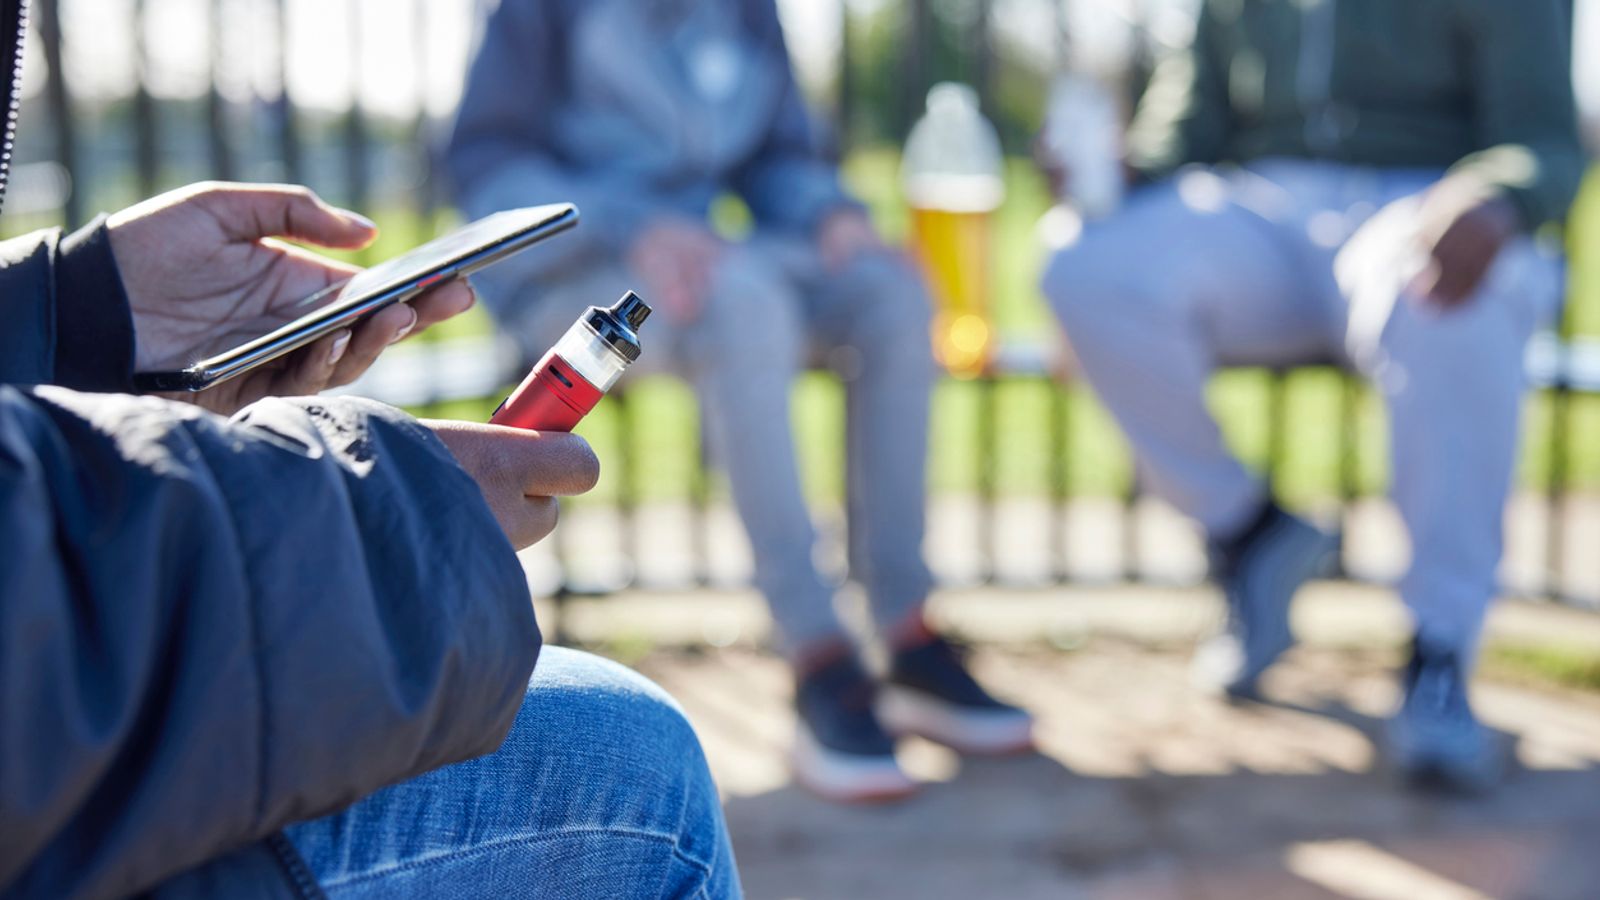 young girls in uk drink, smoke and vape 'more than boys'